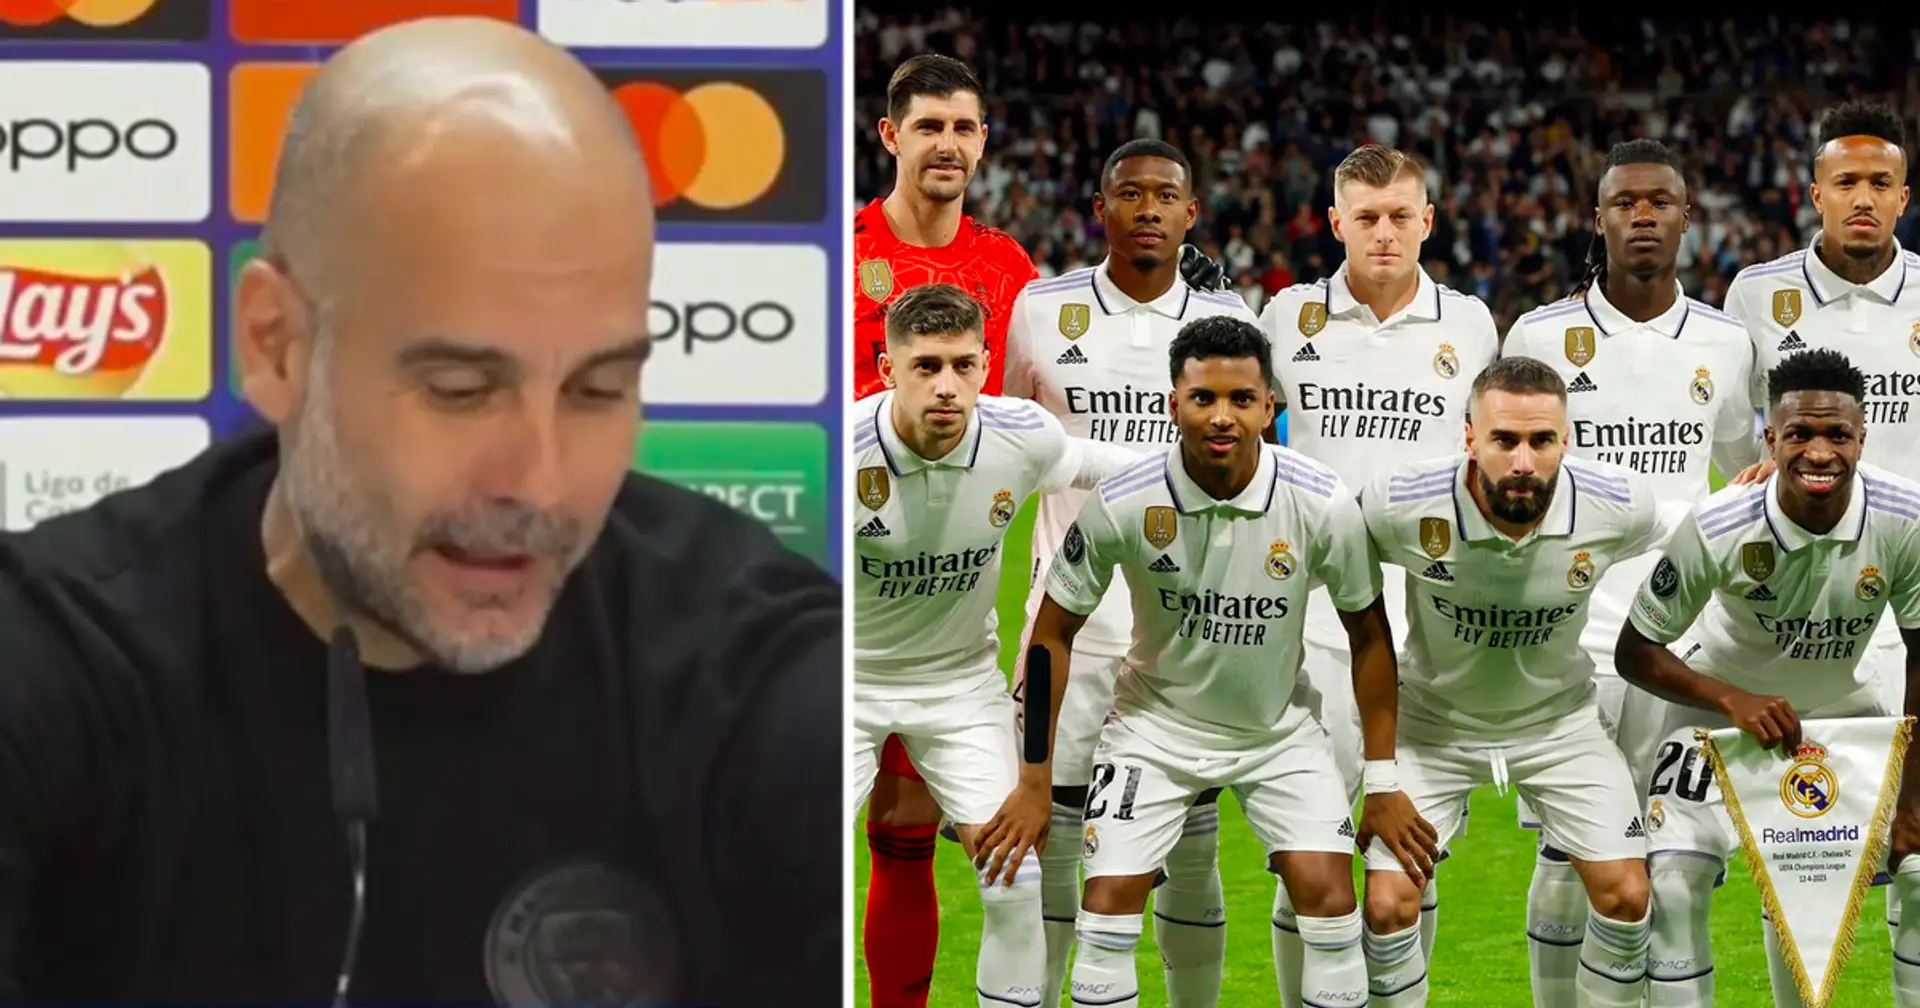 'Sinks you every time he gets the ball': Guardiola singles out one Real Madrid player ahead of CL clash